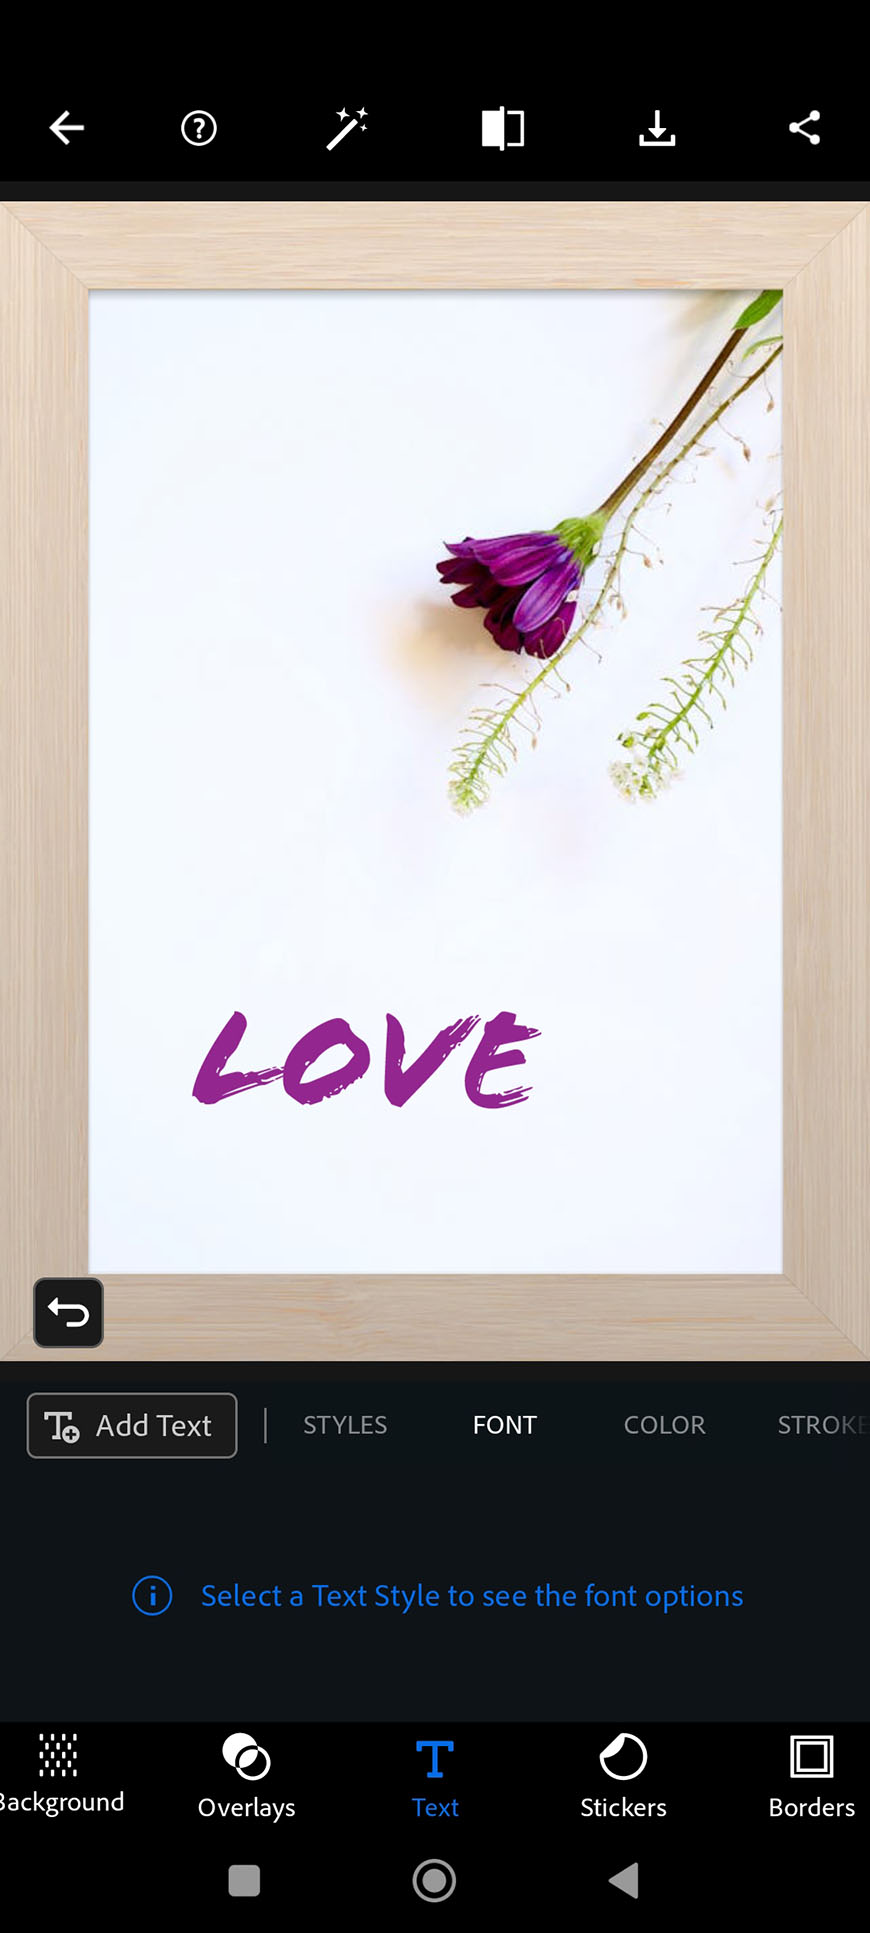 A framed graphic design of a purple flower with the word "love" written in purple, displayed on a phone editing interface.